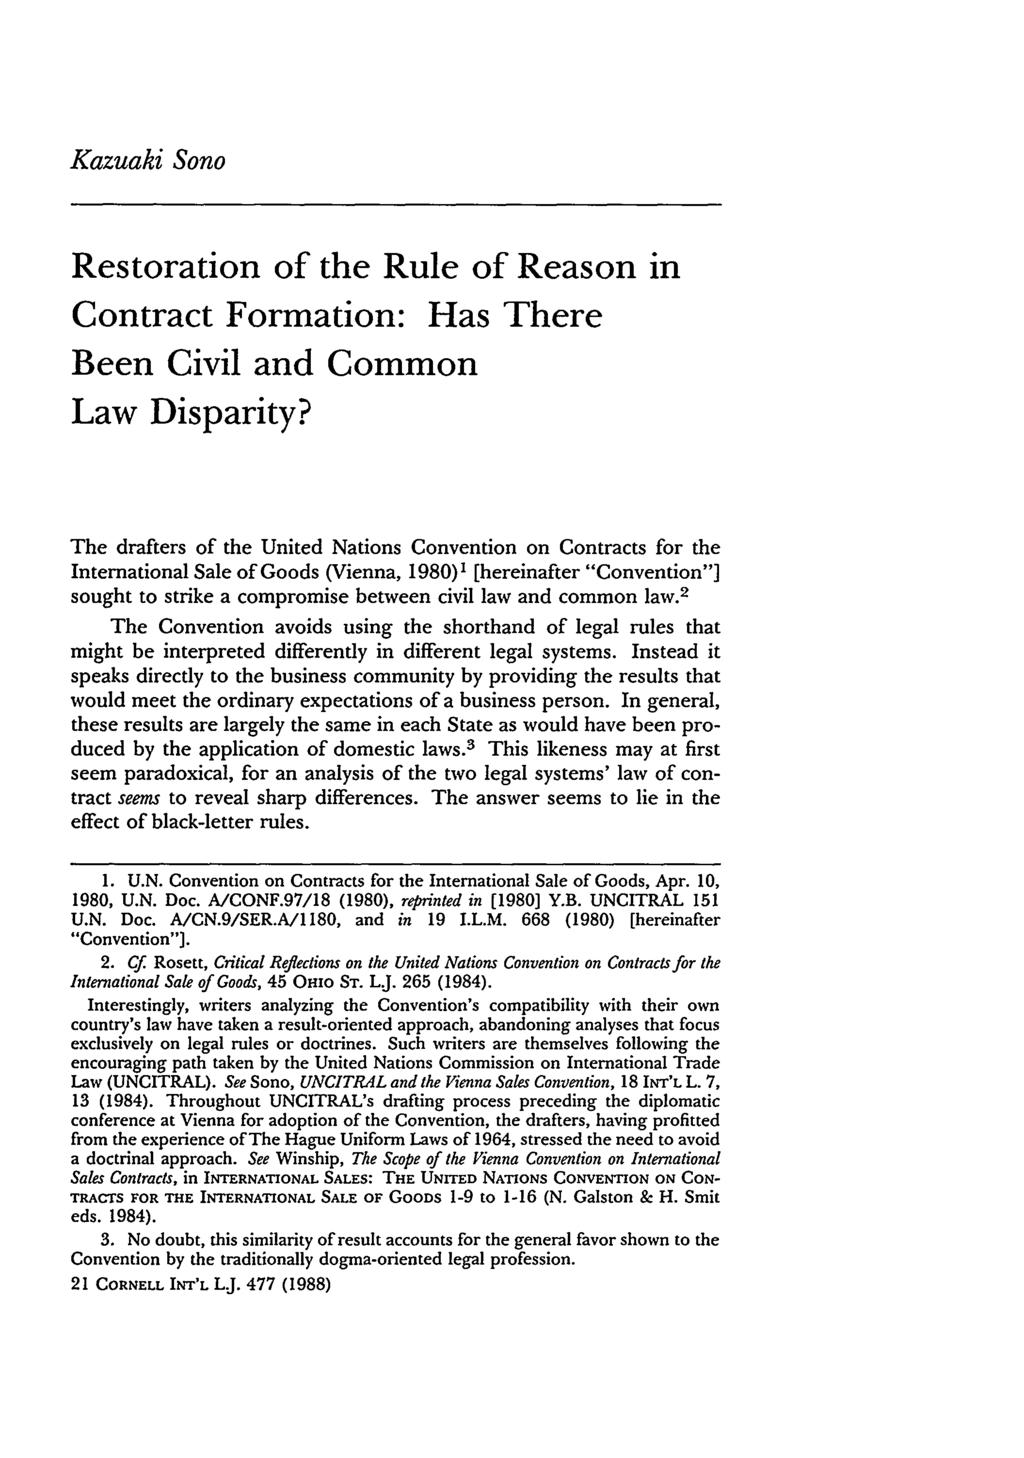 Kazuaki Sono Restoration of the Rule of Reason in Contract Formation: Has There Been Civil and Common Law Disparity?